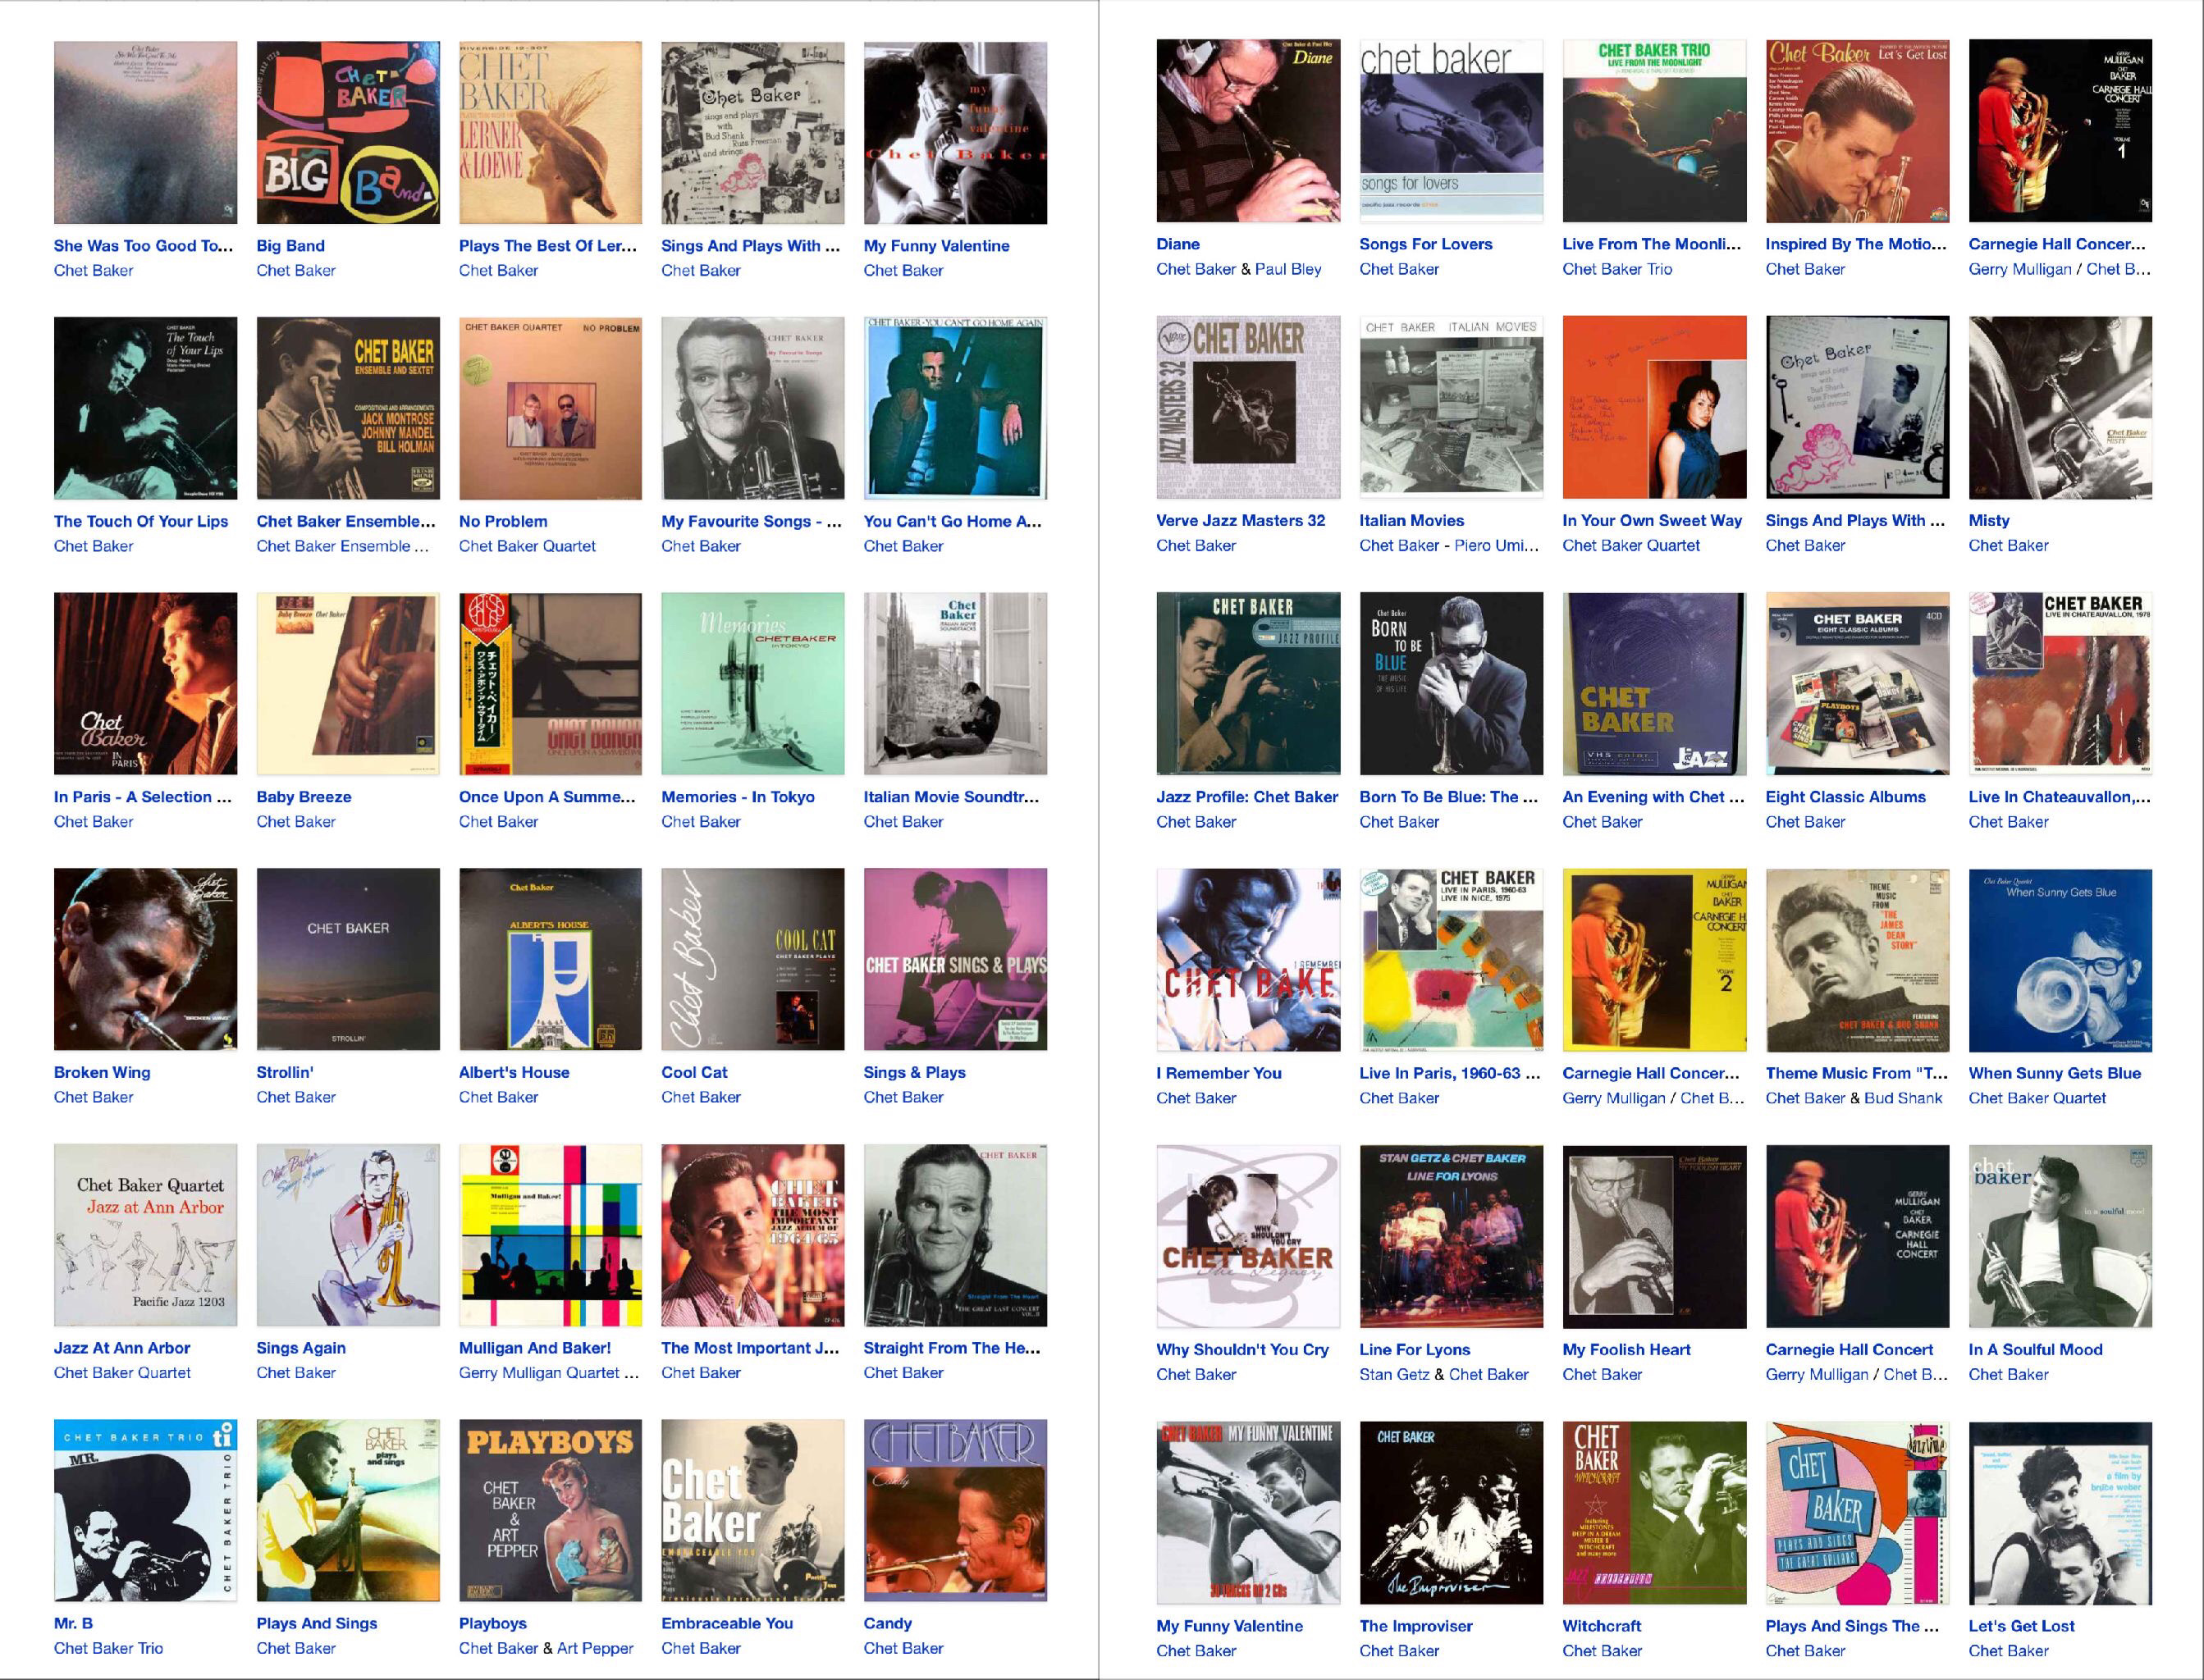 A color composite of many of Chet Baker's album covers with titles.